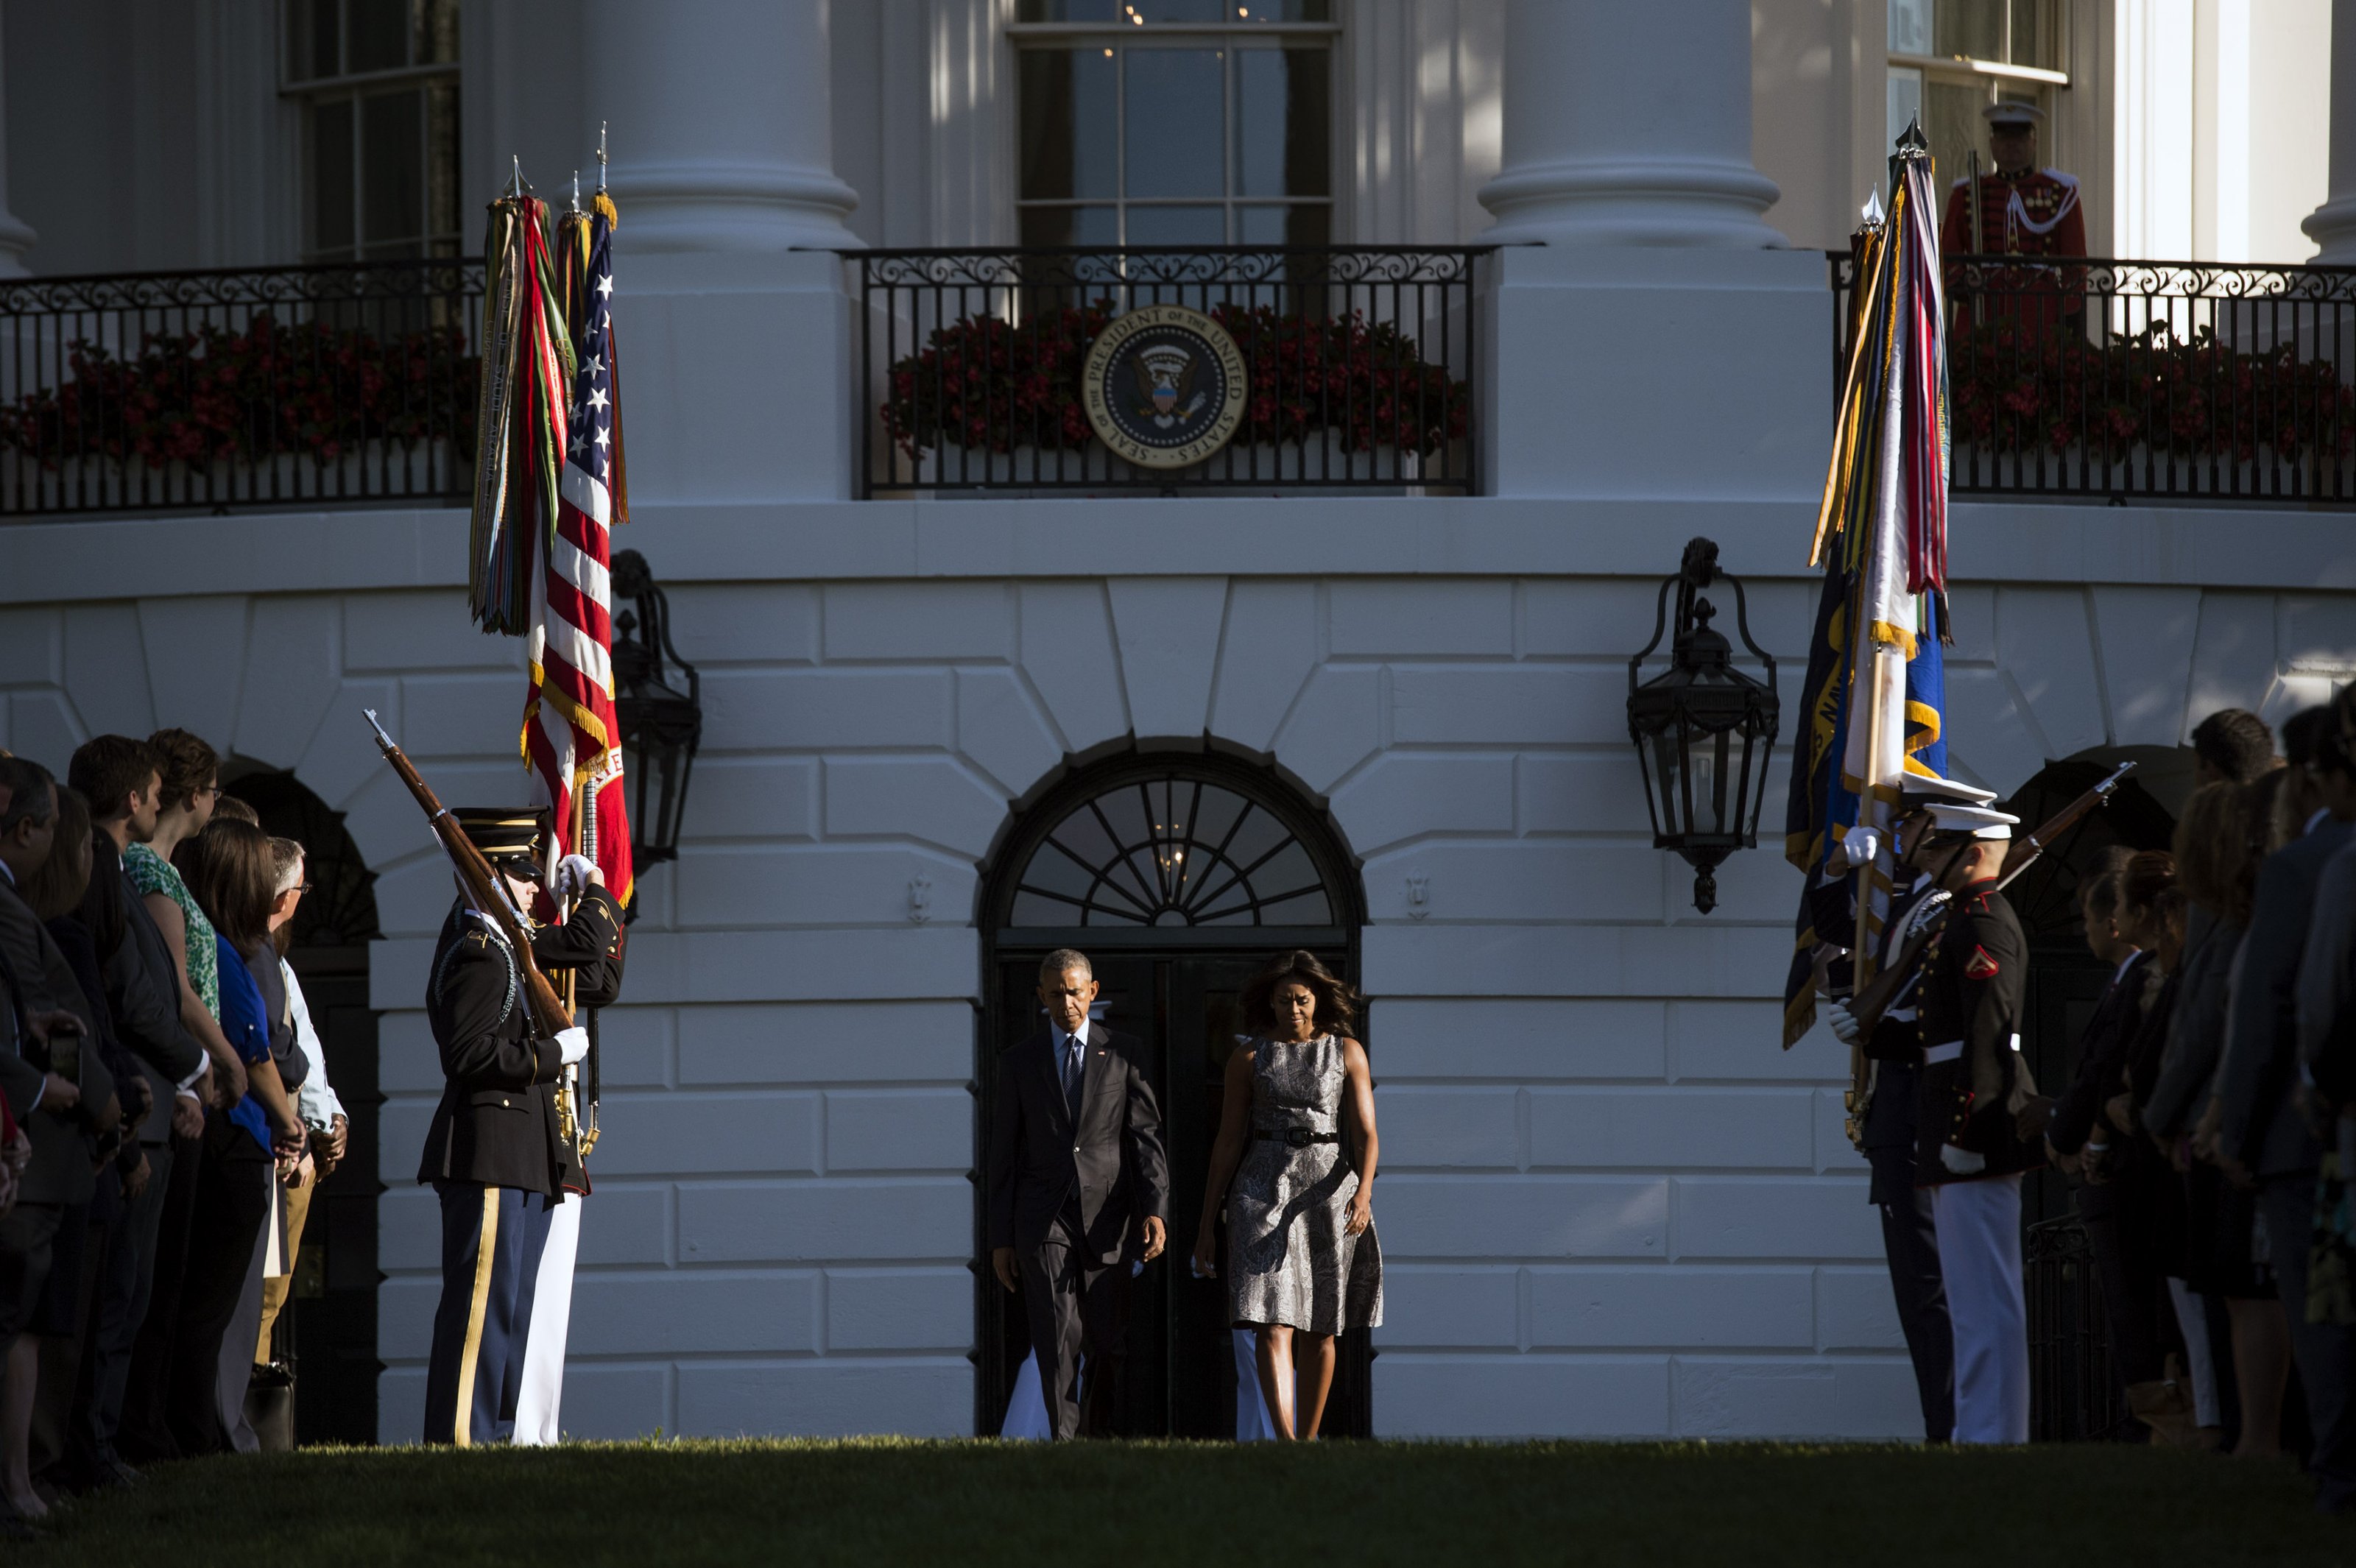 President Barack Obama and First Lady Michelle Obama walk onto the South Lawn to participate in a moment of silence for the 14th anniversary of the September 11 terrorist attacks on the United States, at the White House in Washington, D.C. on September 11, 2015. Photo by Kevin Dietsch/UPI/ABACAPRESS.COM